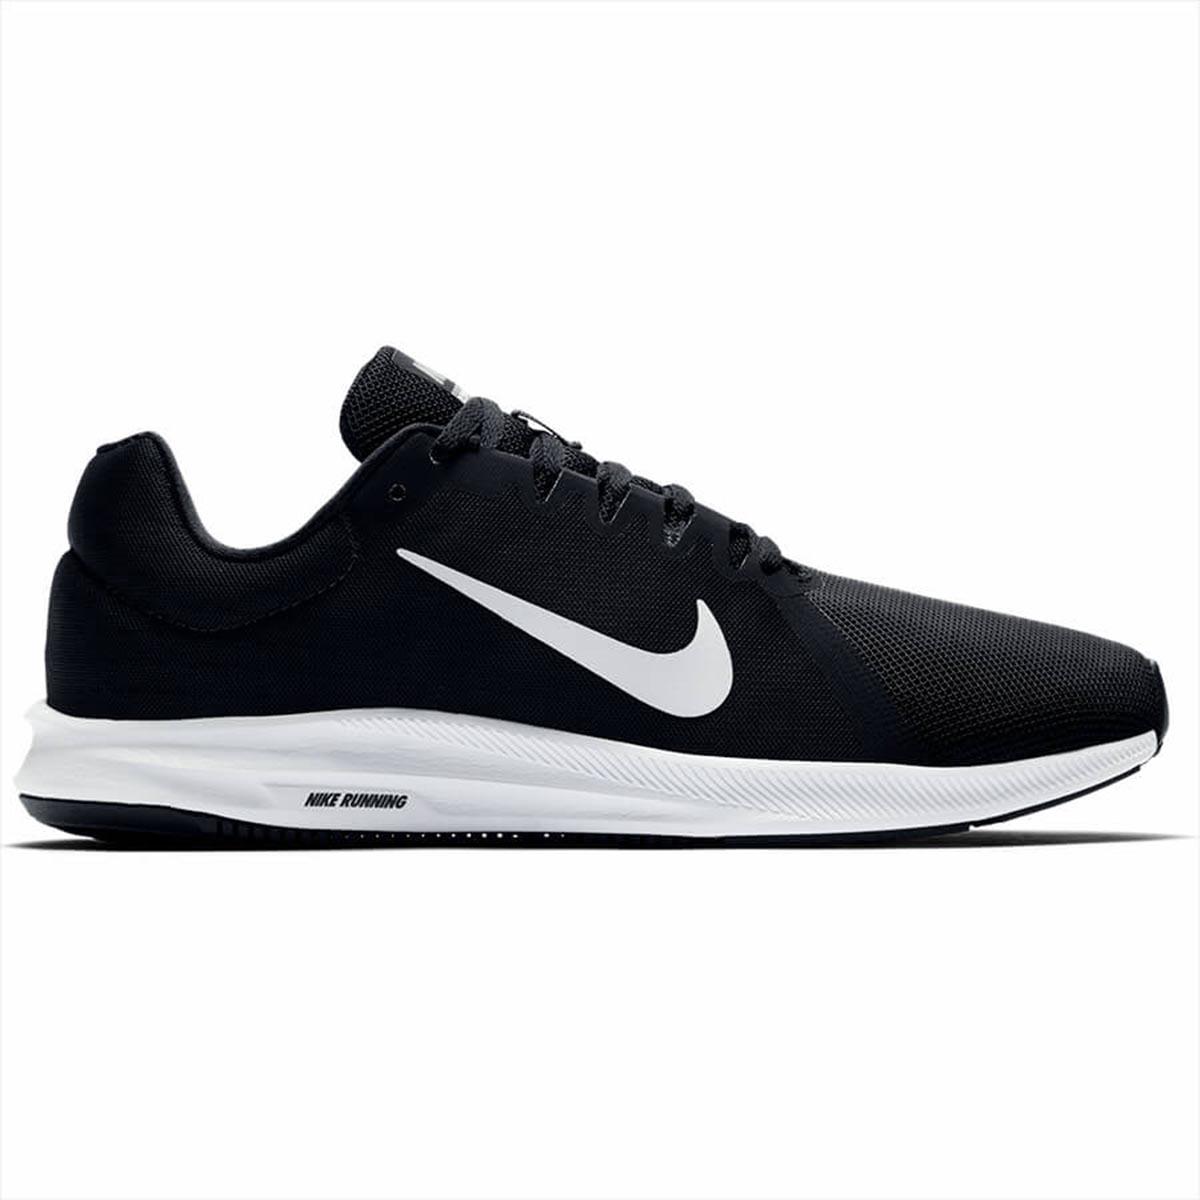 Buy Nike Downshifter 8 Running Shoes (Black/White/Athracte) Online